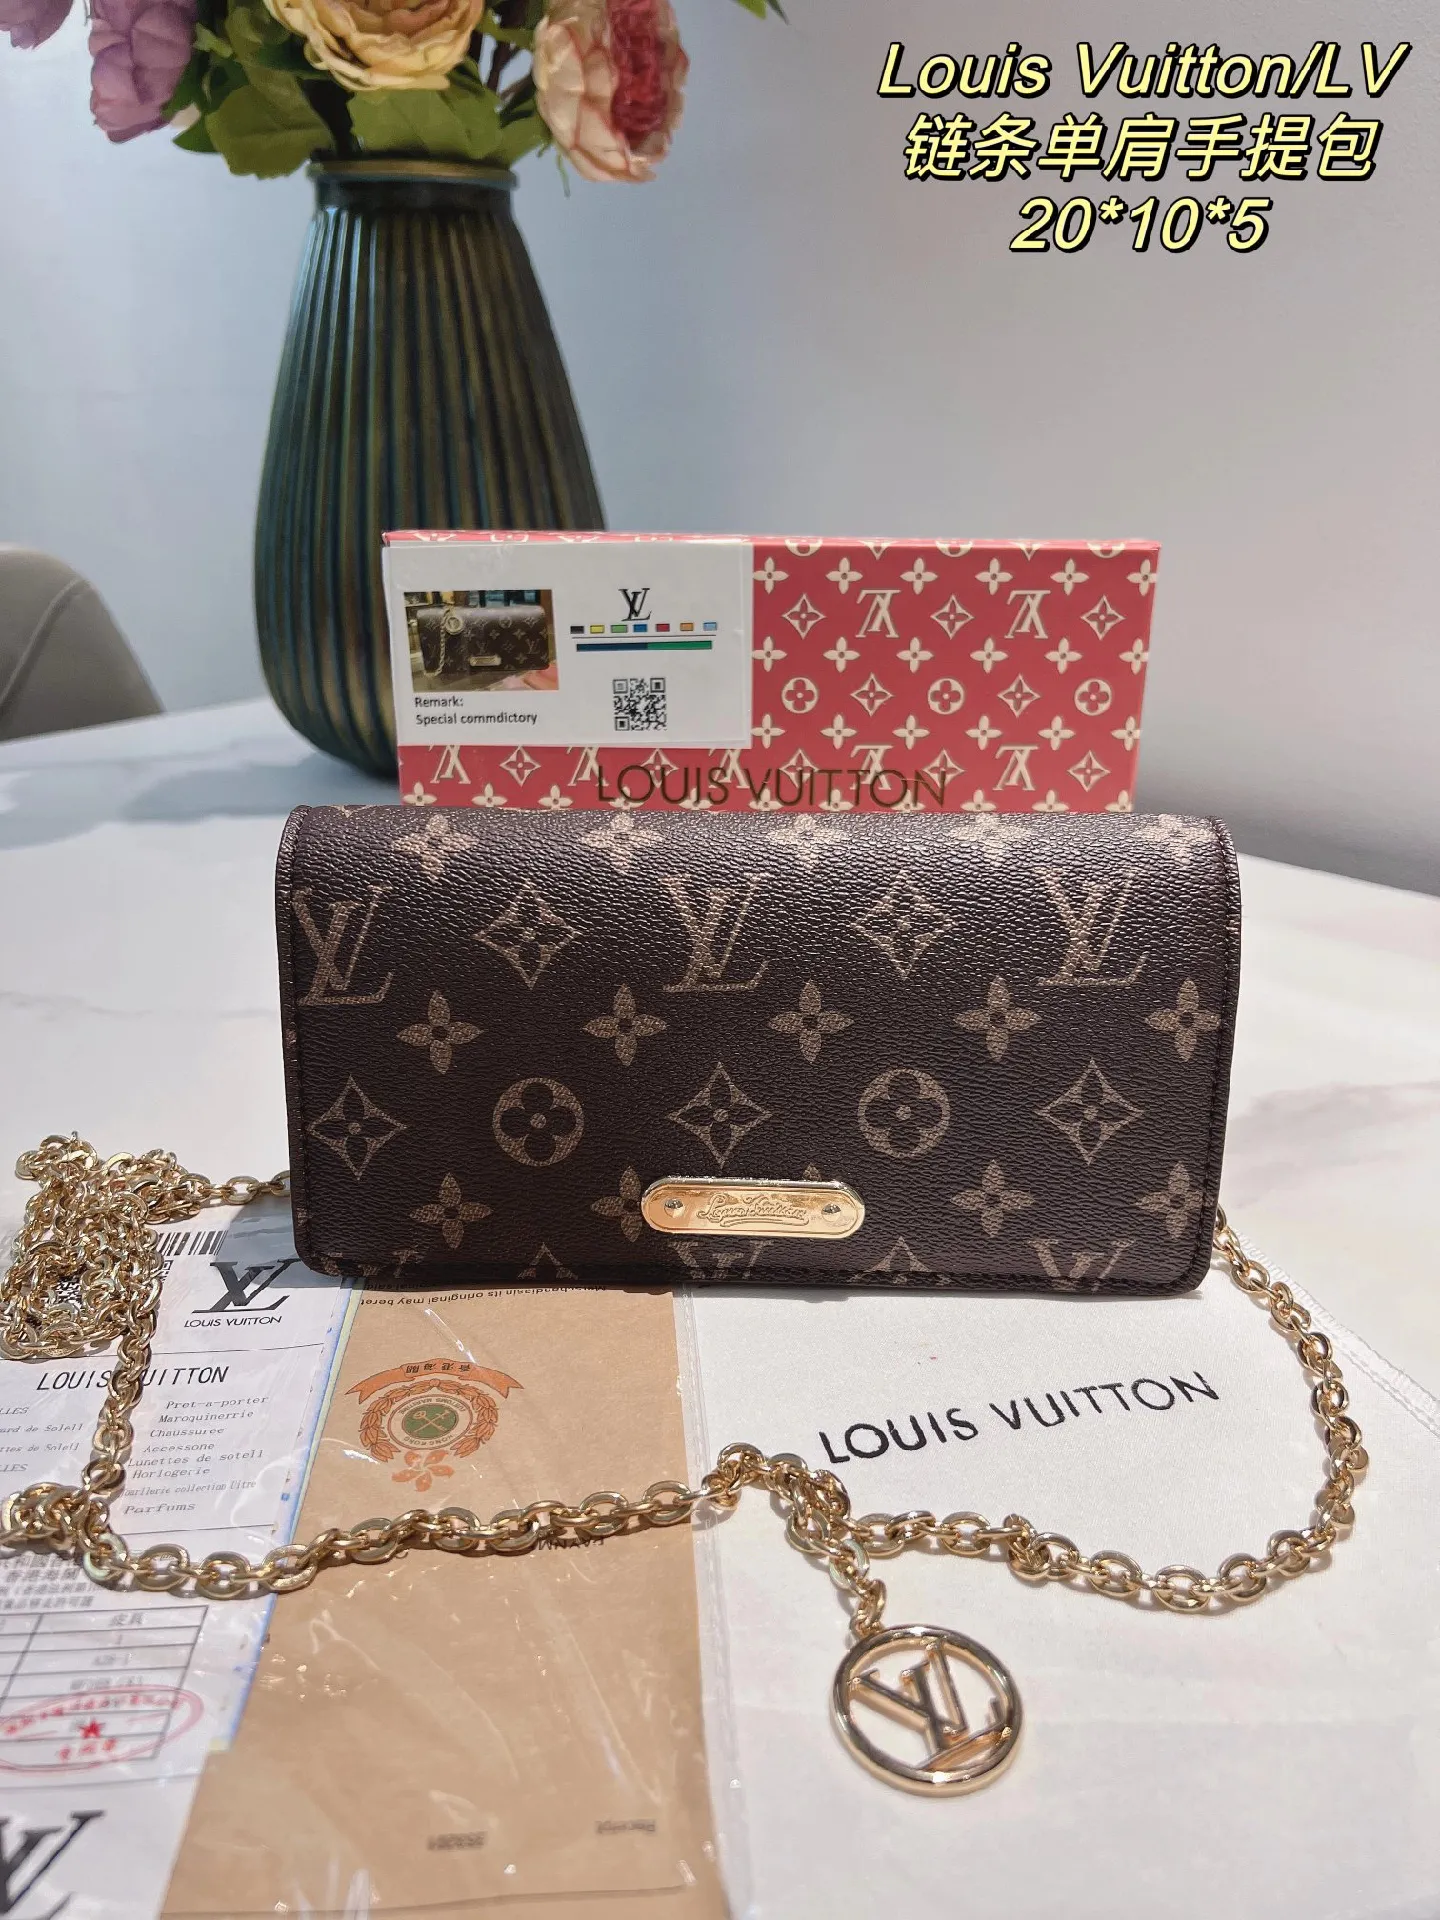 Louis Vuitton/LV, Gallery posted by Aaliyah hh